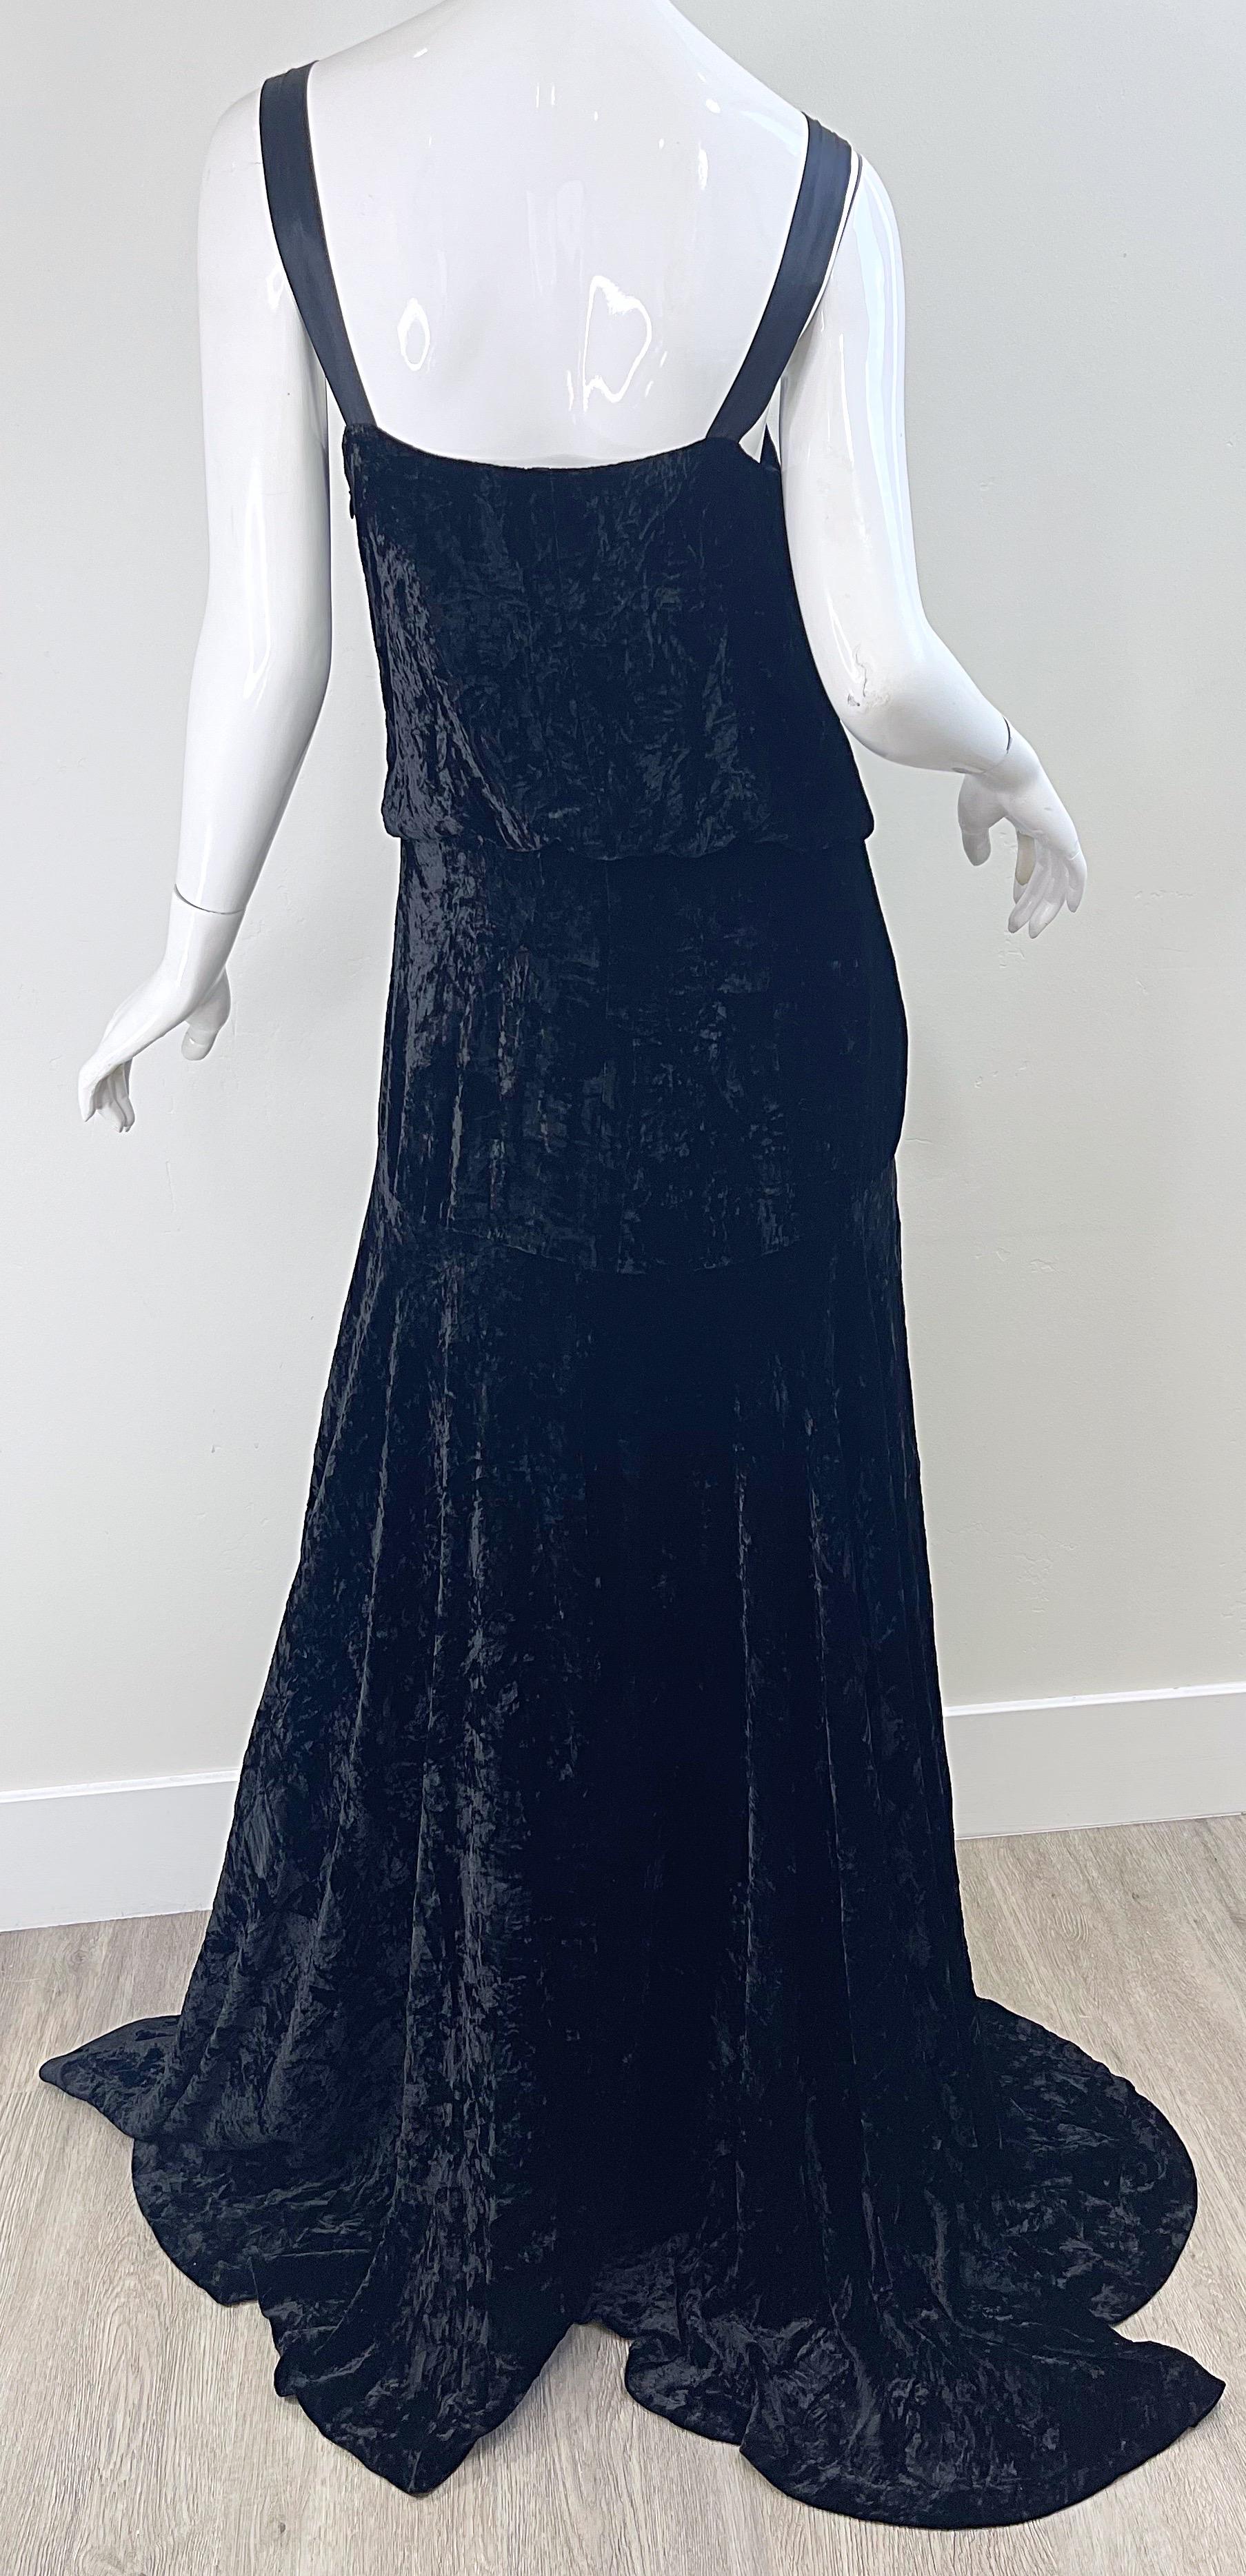 NWT Michael Kors Collection Fall 2006 Runway Size 6-8 Black Crushed Velvet Gown For Sale 10